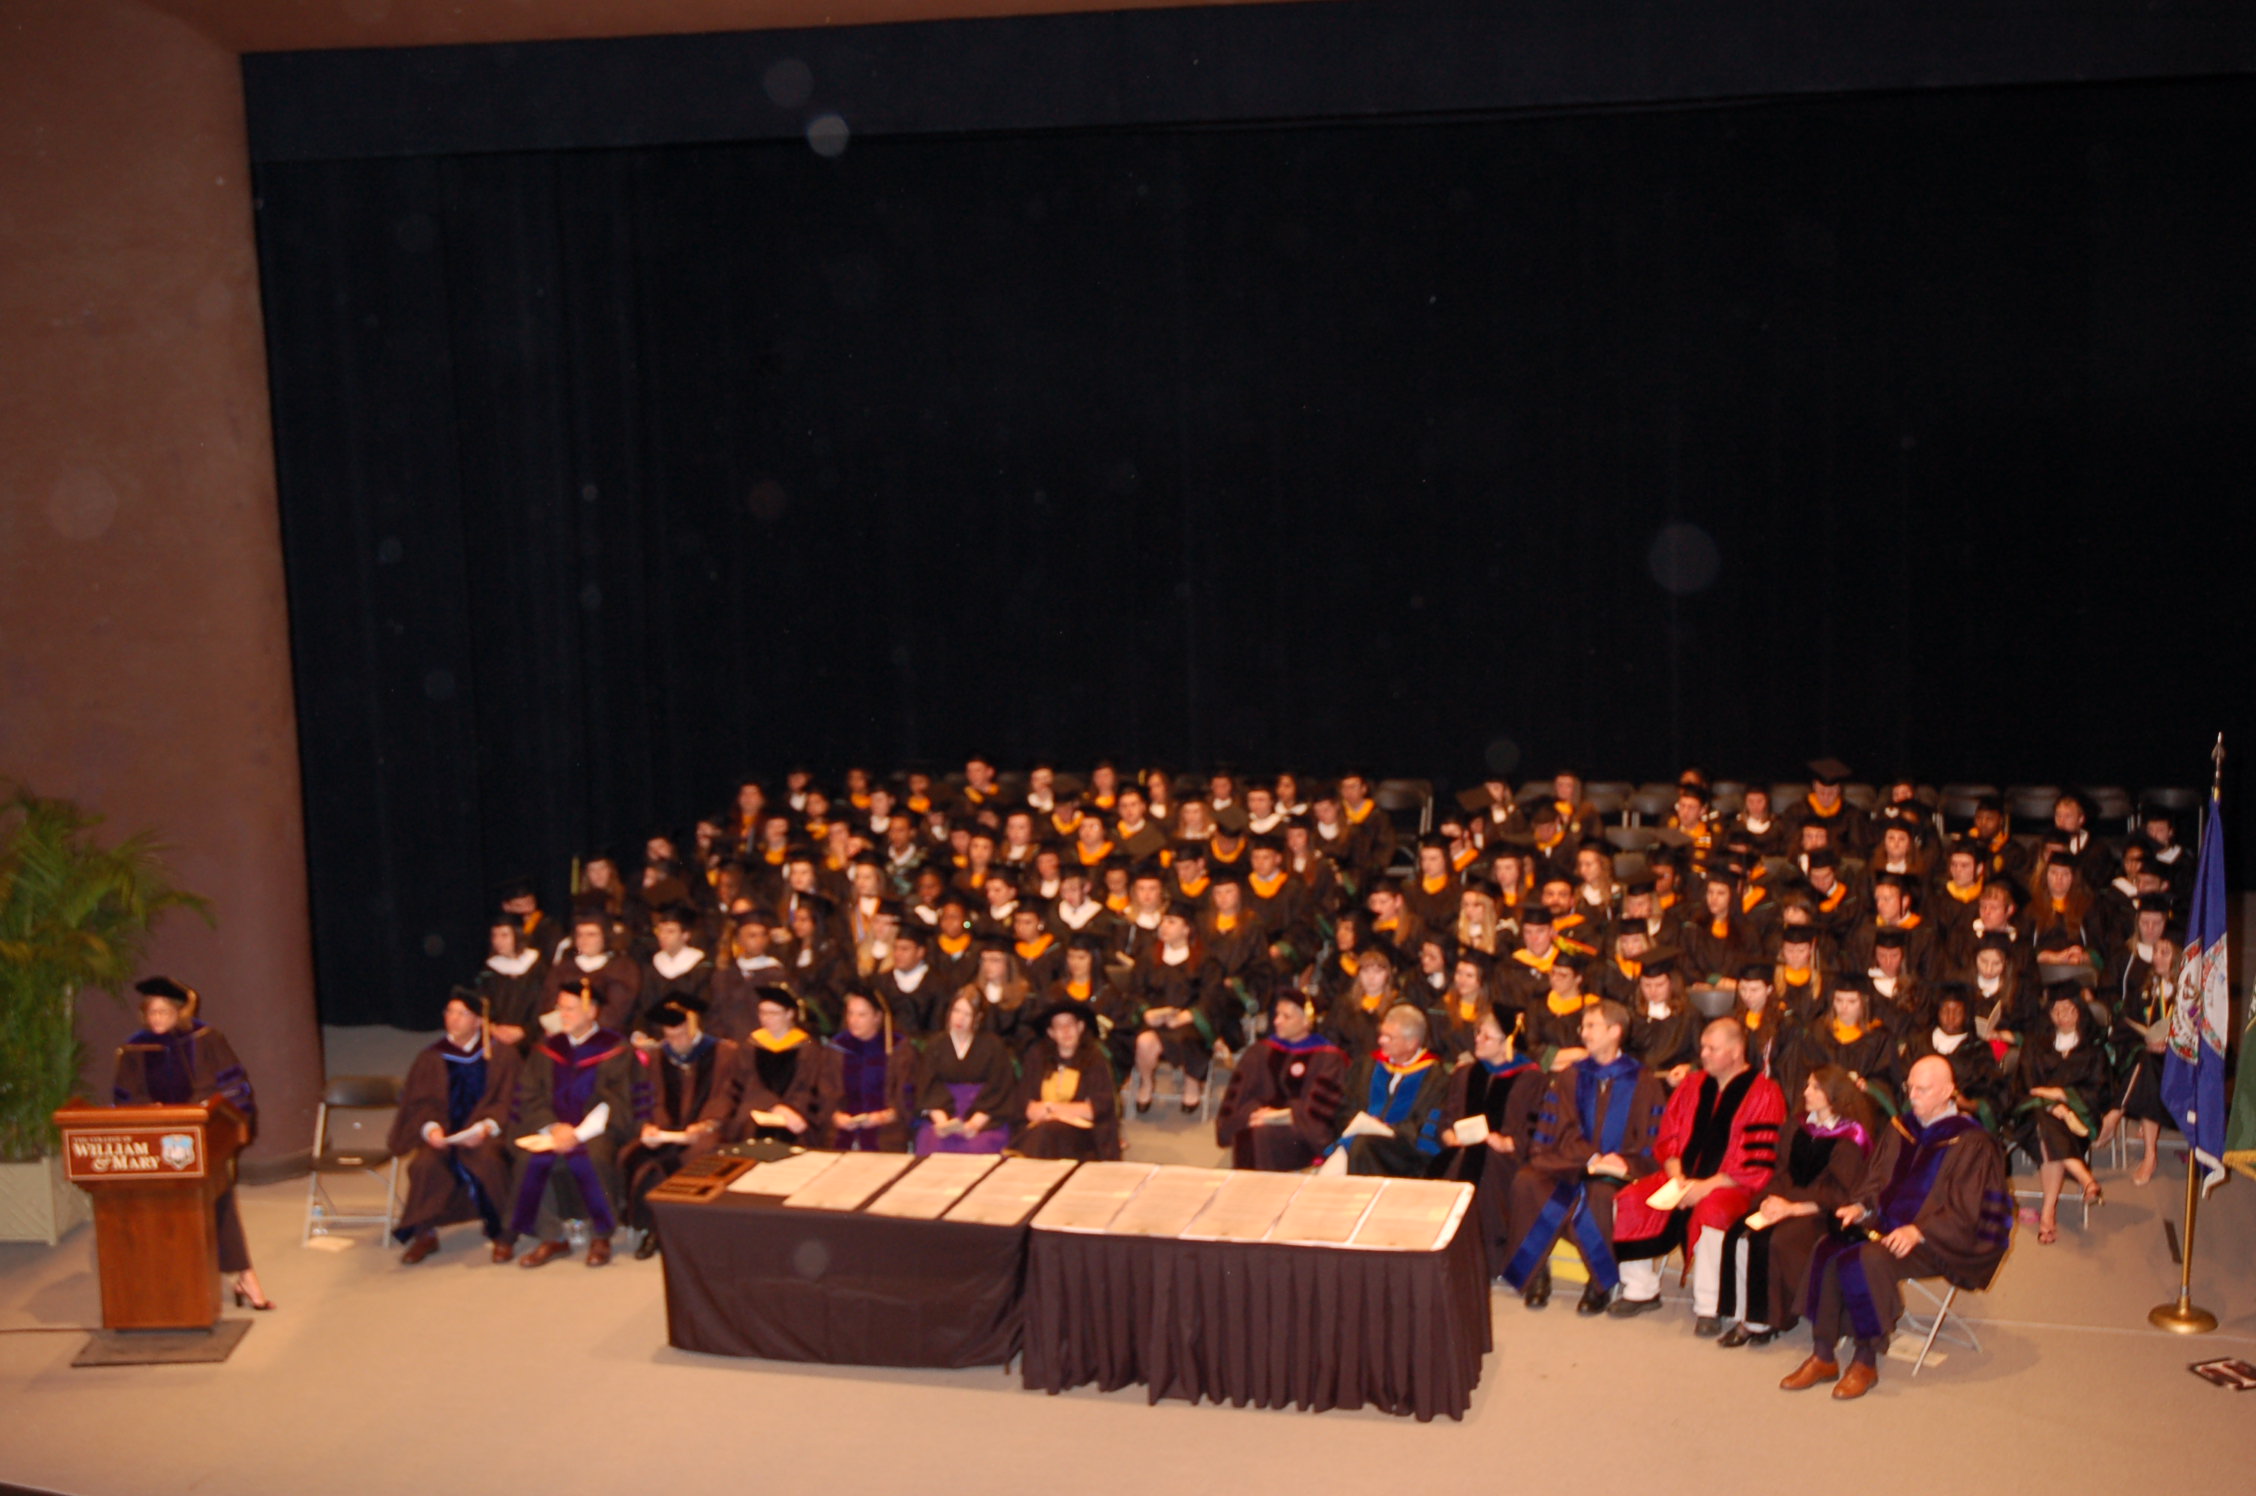 Please read our graduation article to get a glimpse of the Psychology department graduation.